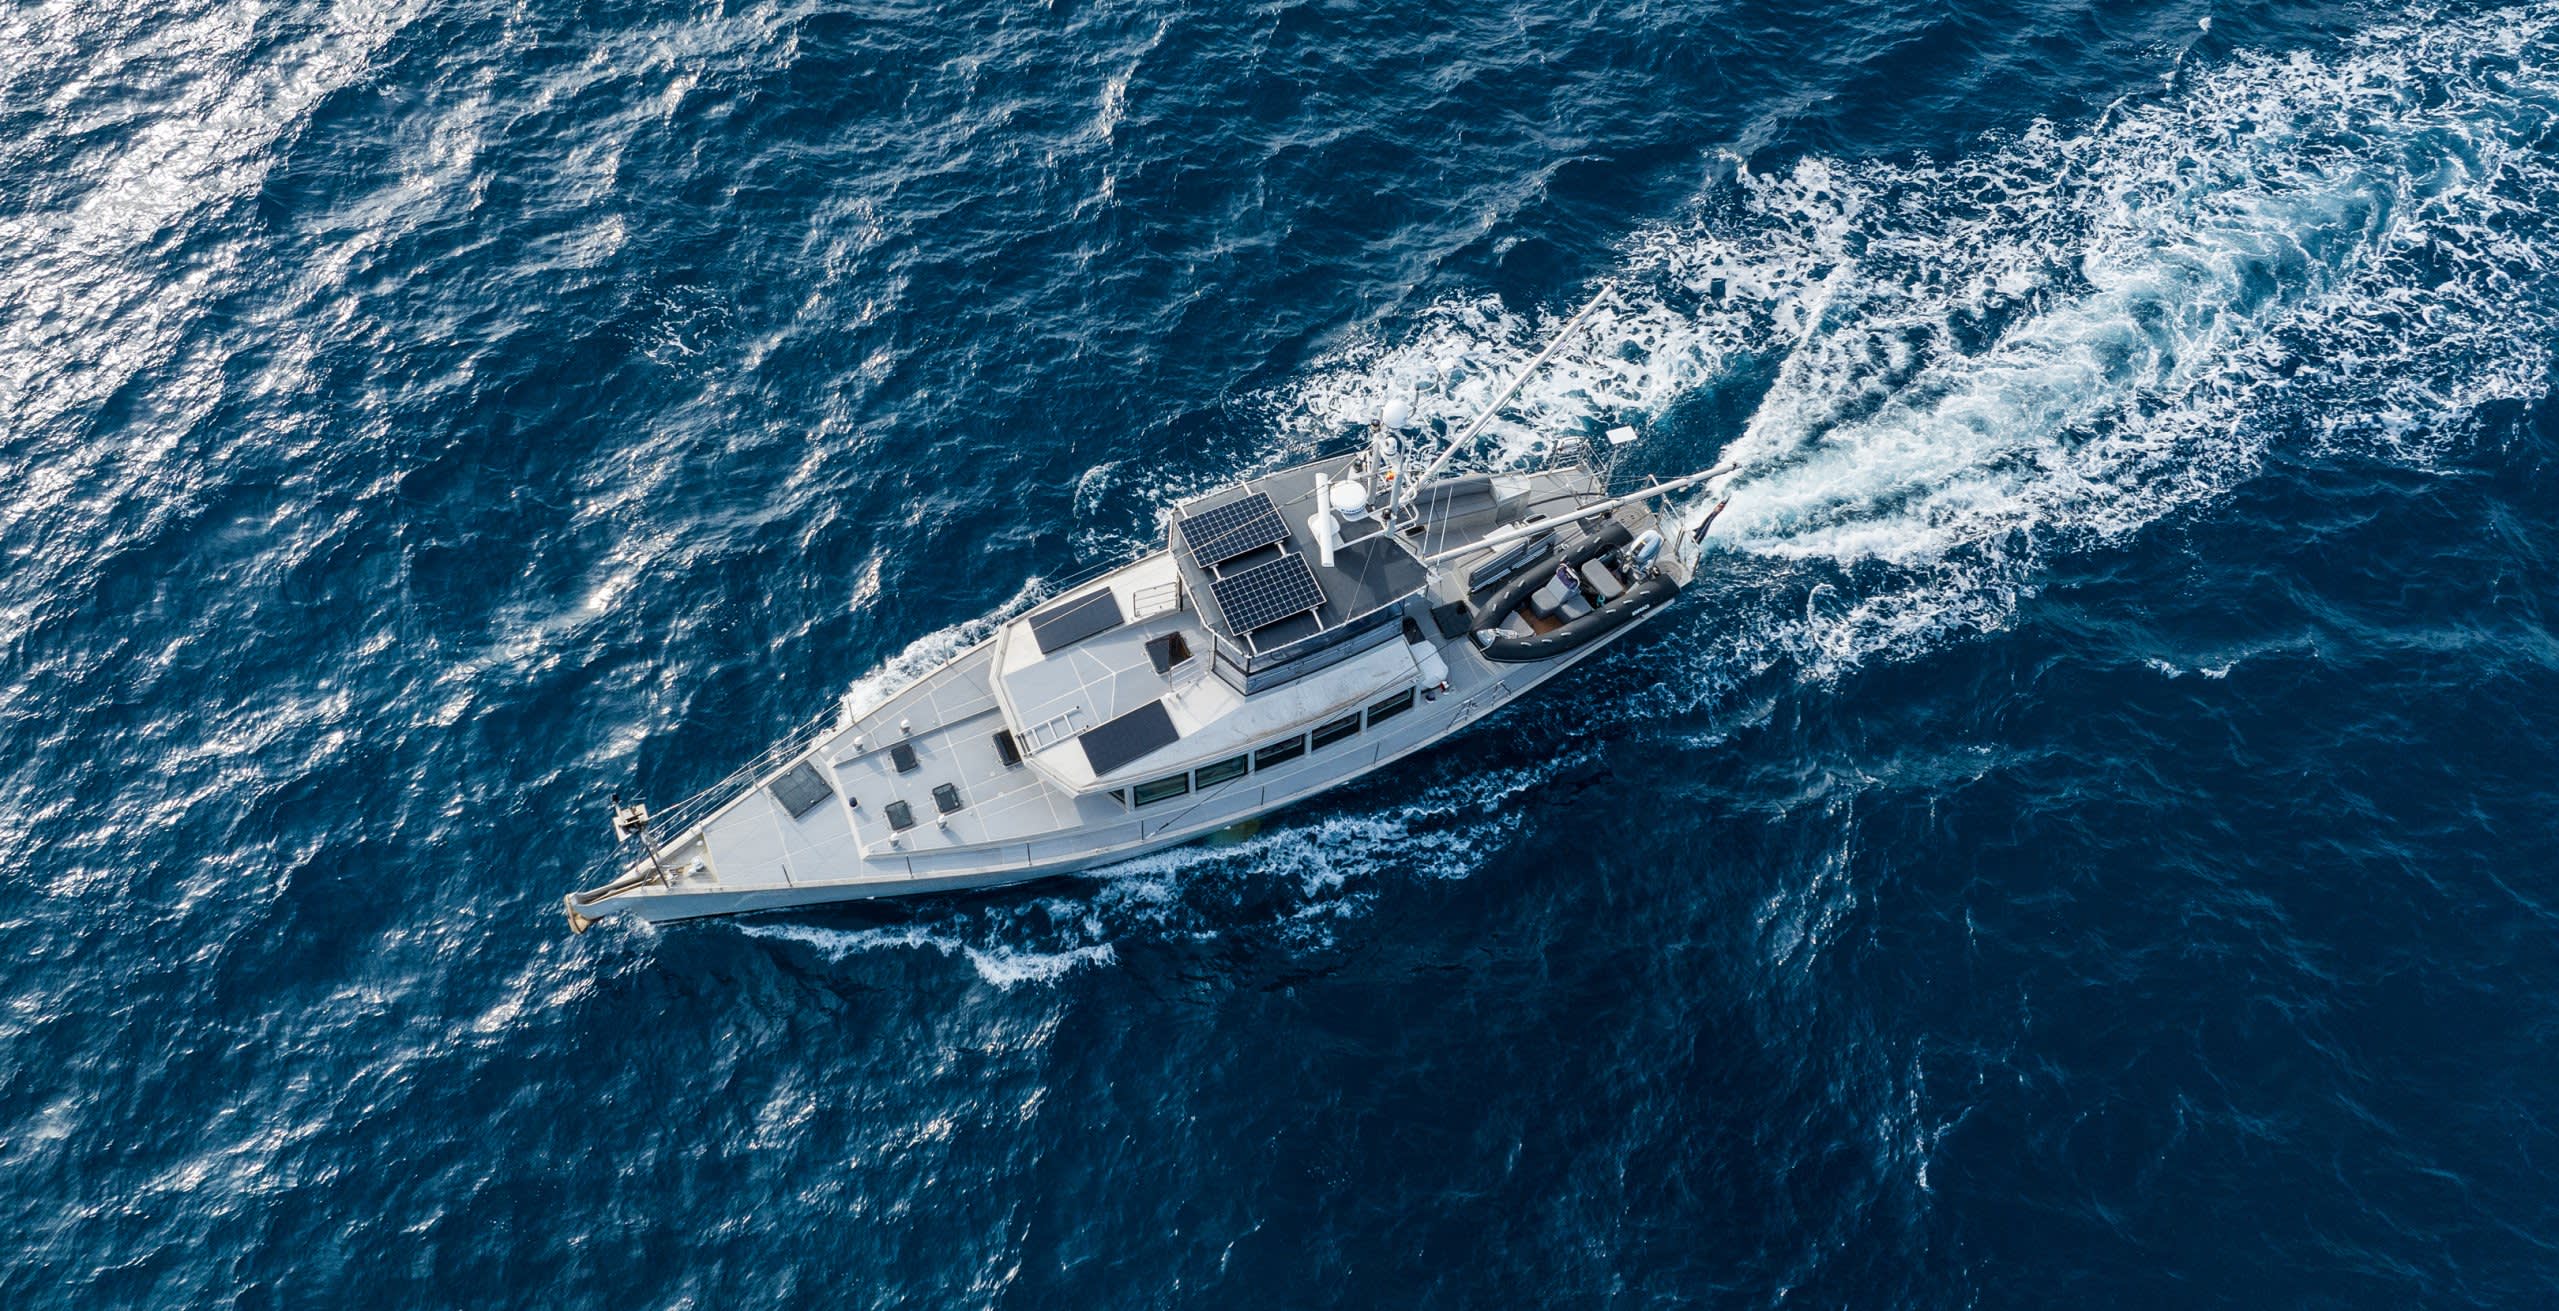 fpb yacht review